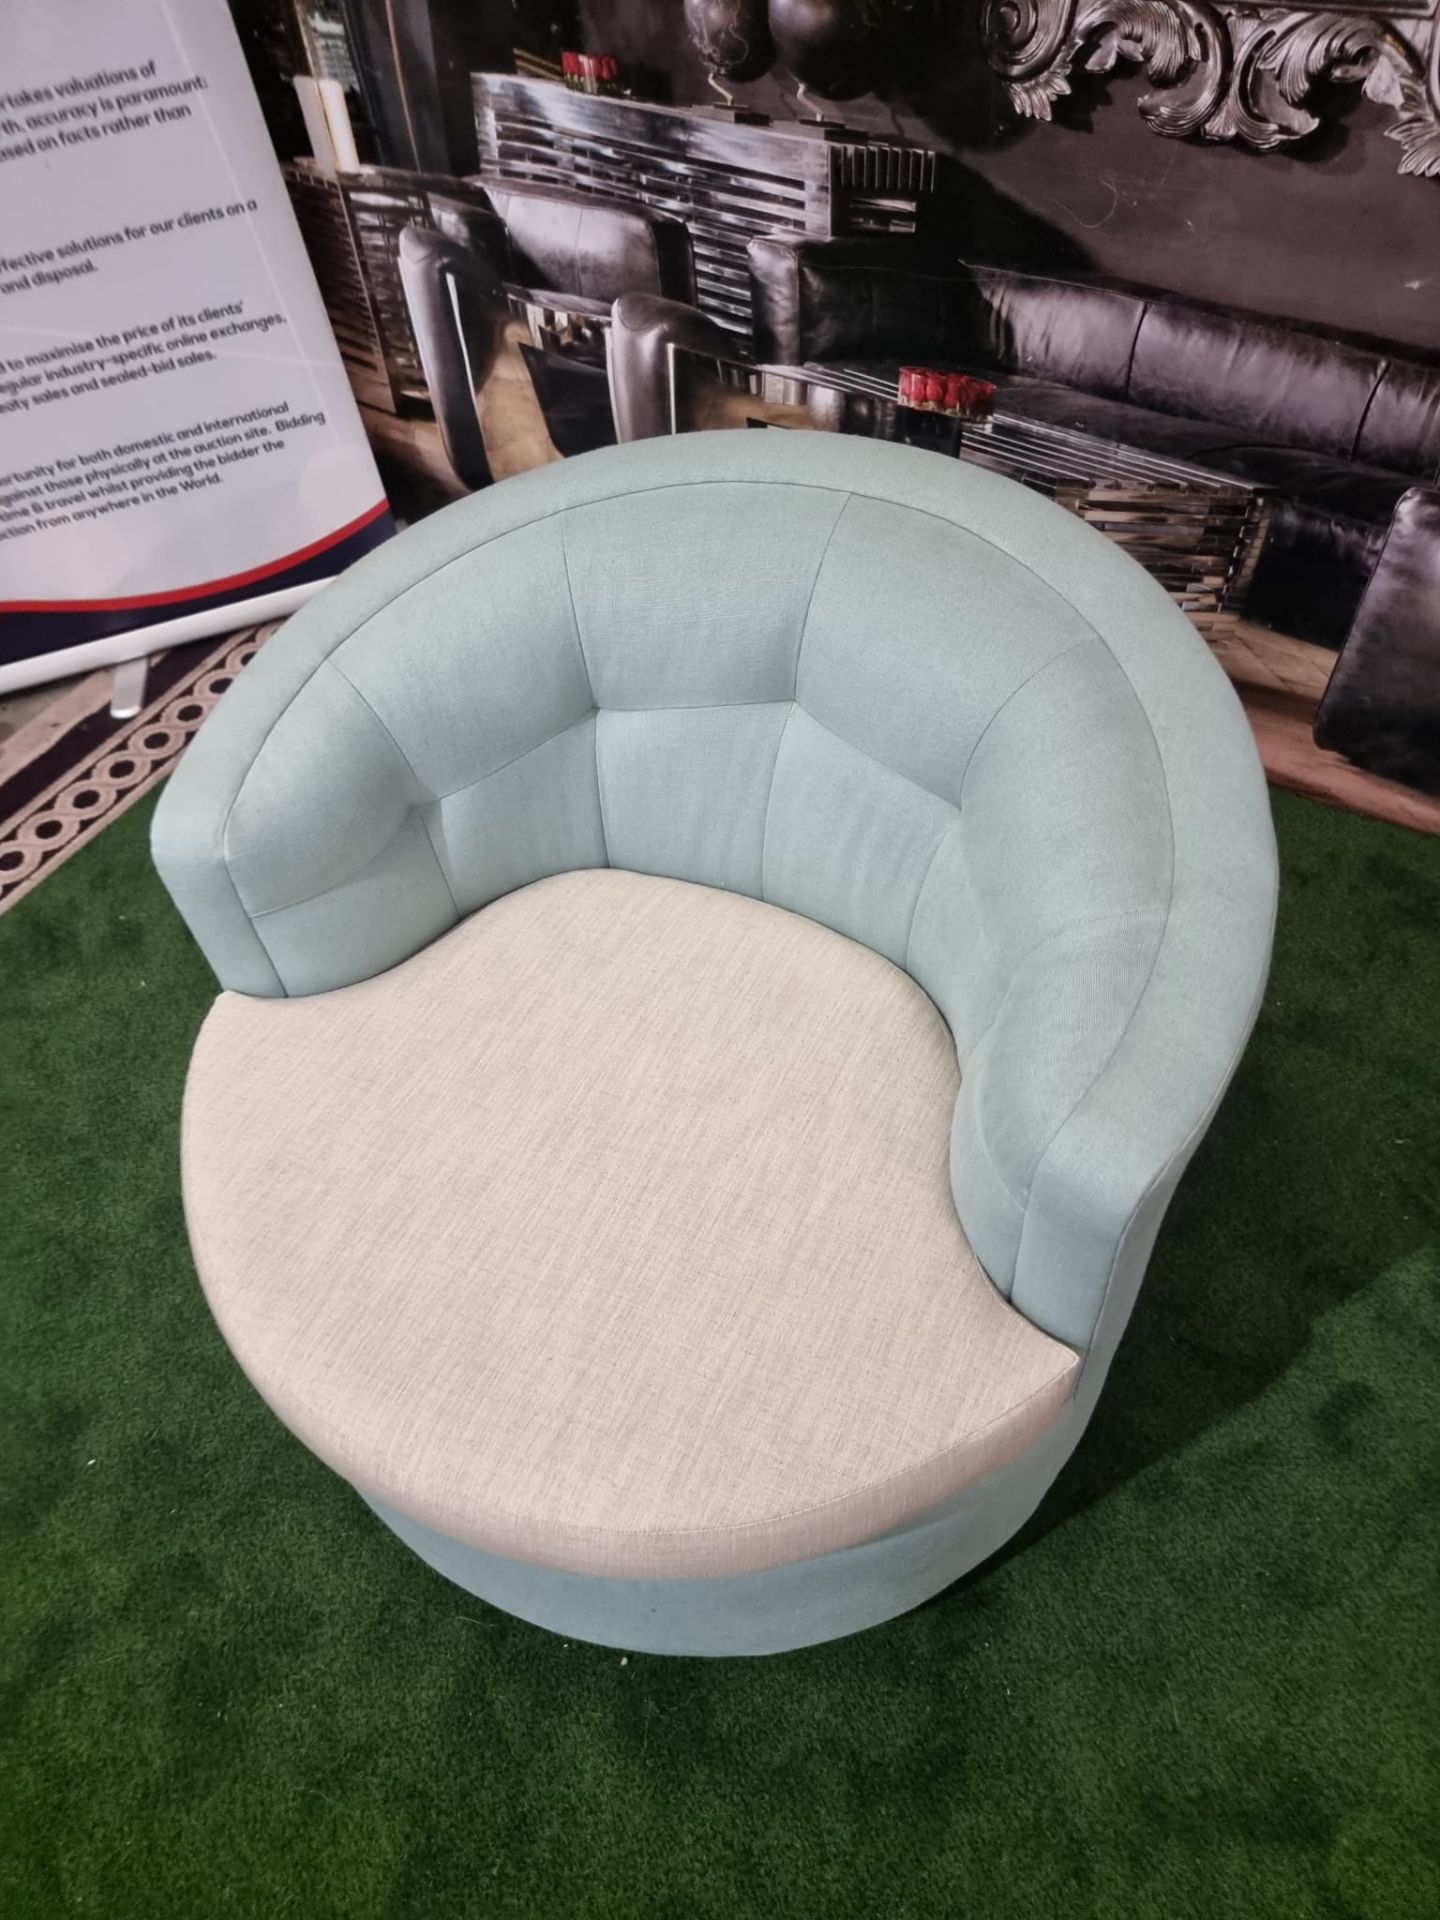 Mayfair Swivel Armchair This Swivel Armchair Makes A Real Statement And Adds A Contemporary Accent